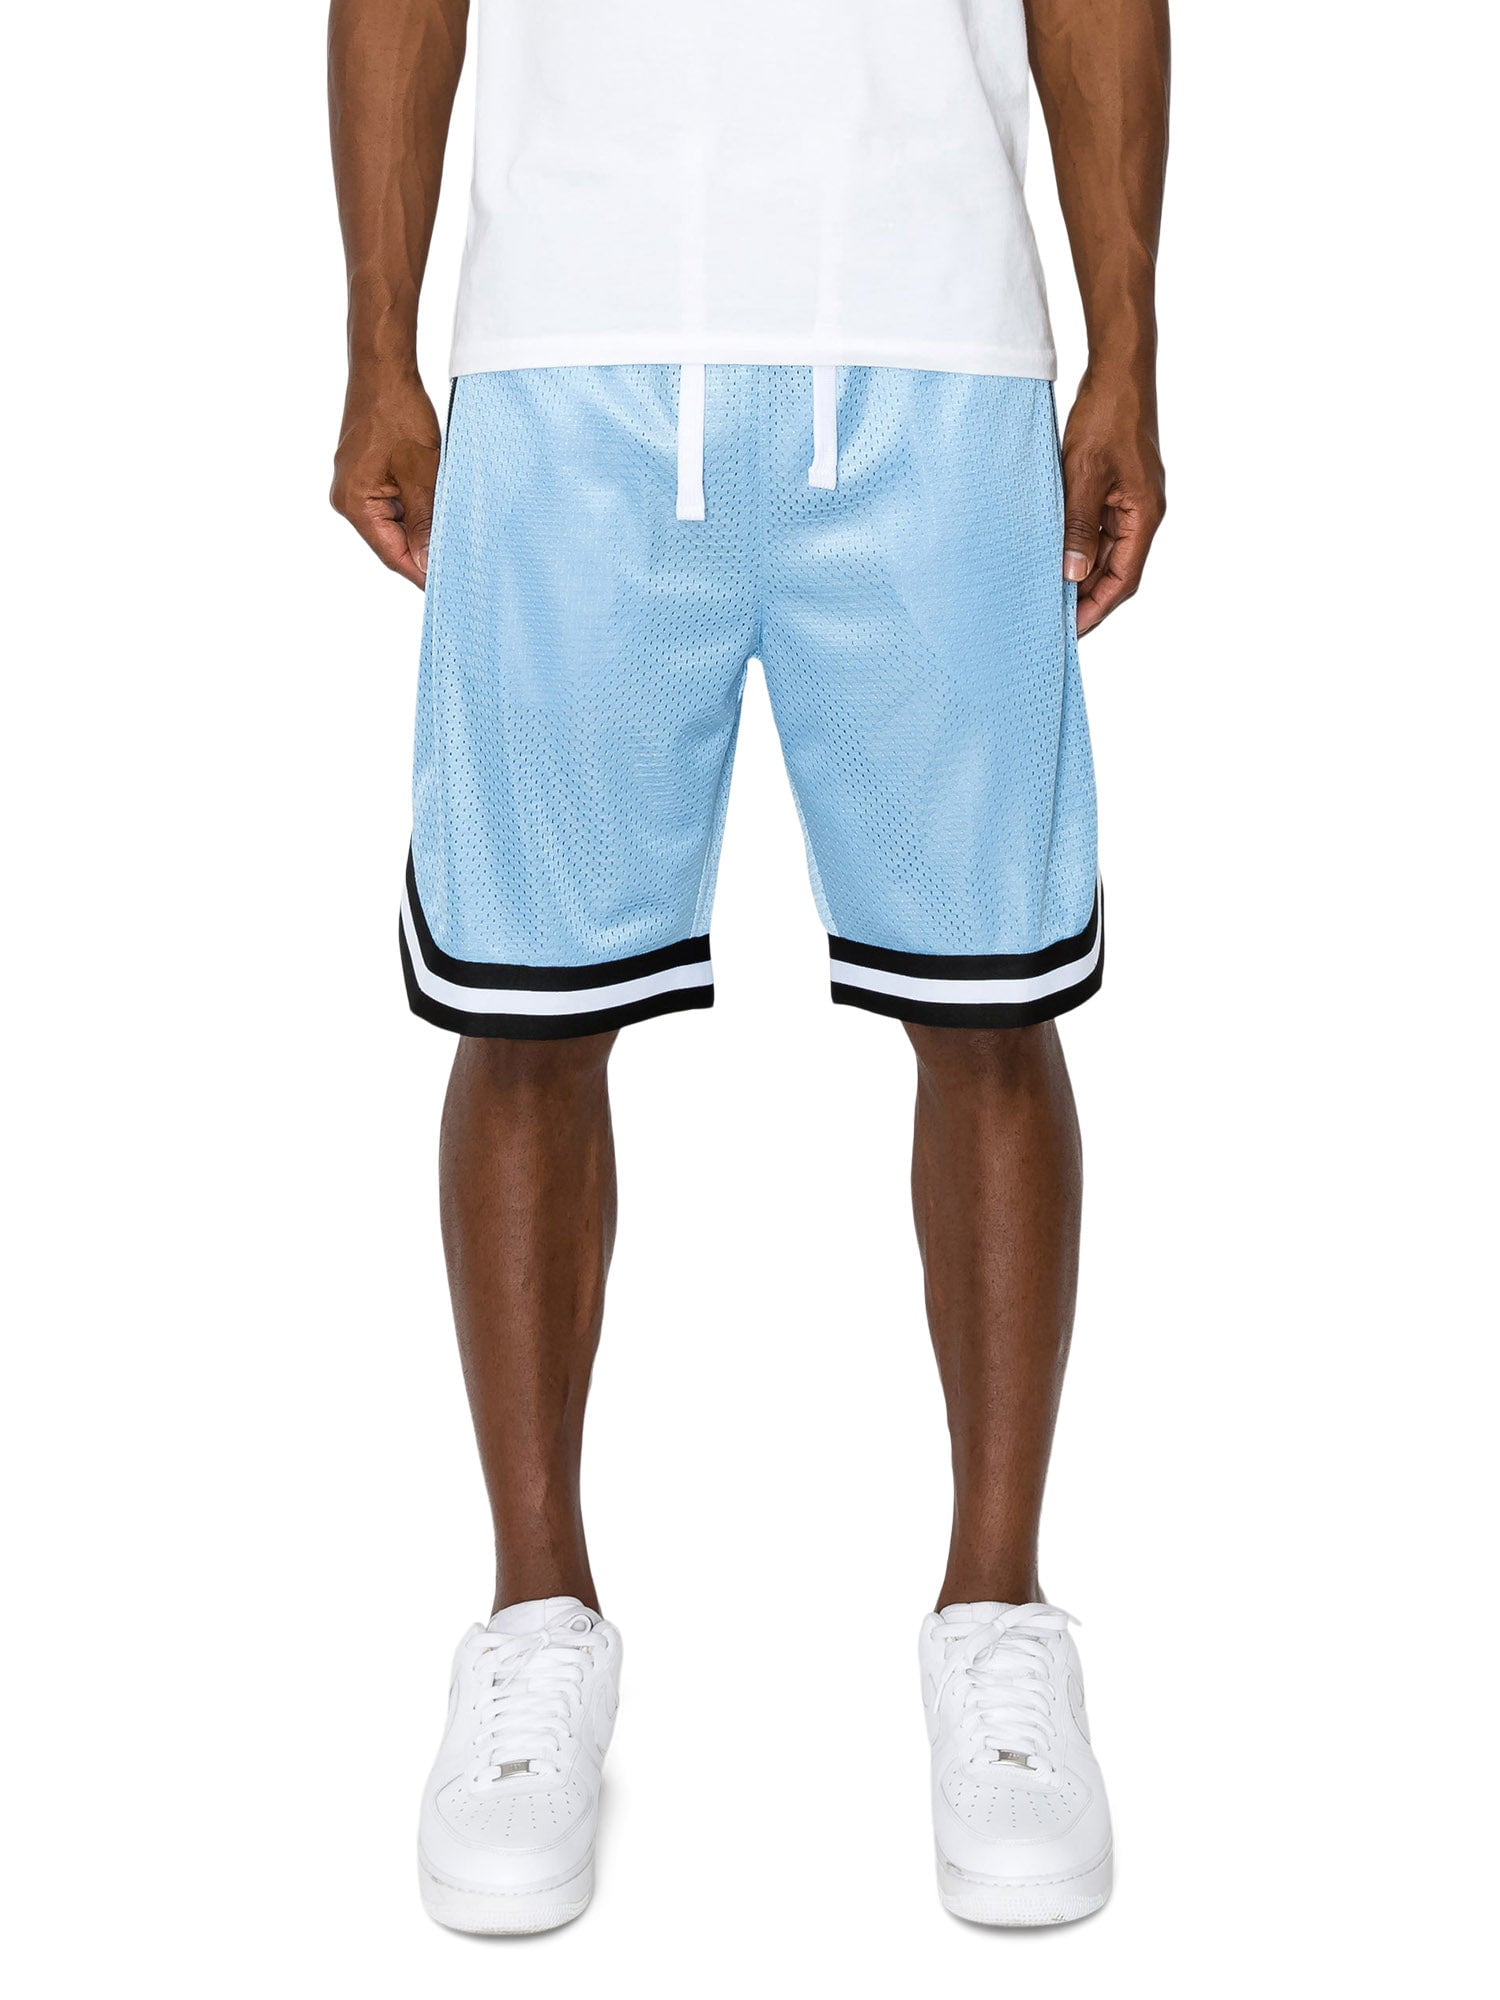 Victorious Men's Double Layered Drawstring Mesh Basketball Shorts with  Zippered Pockets, up to 5X 